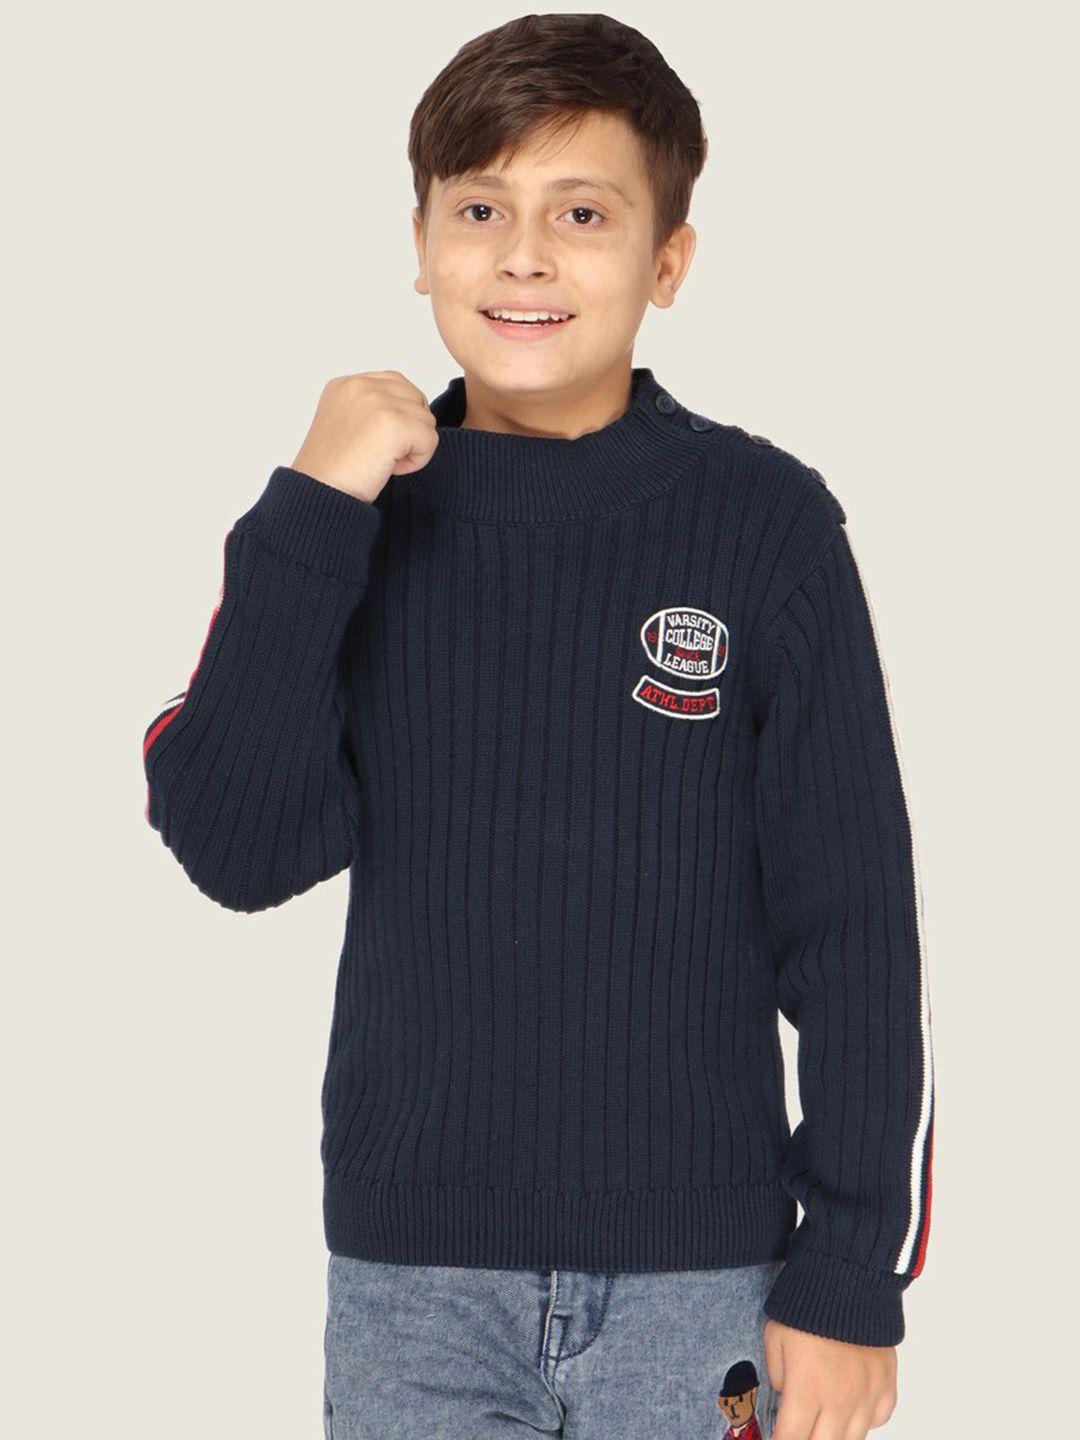 lasnak boys navy blue & white ribbed cotton pullover sweater